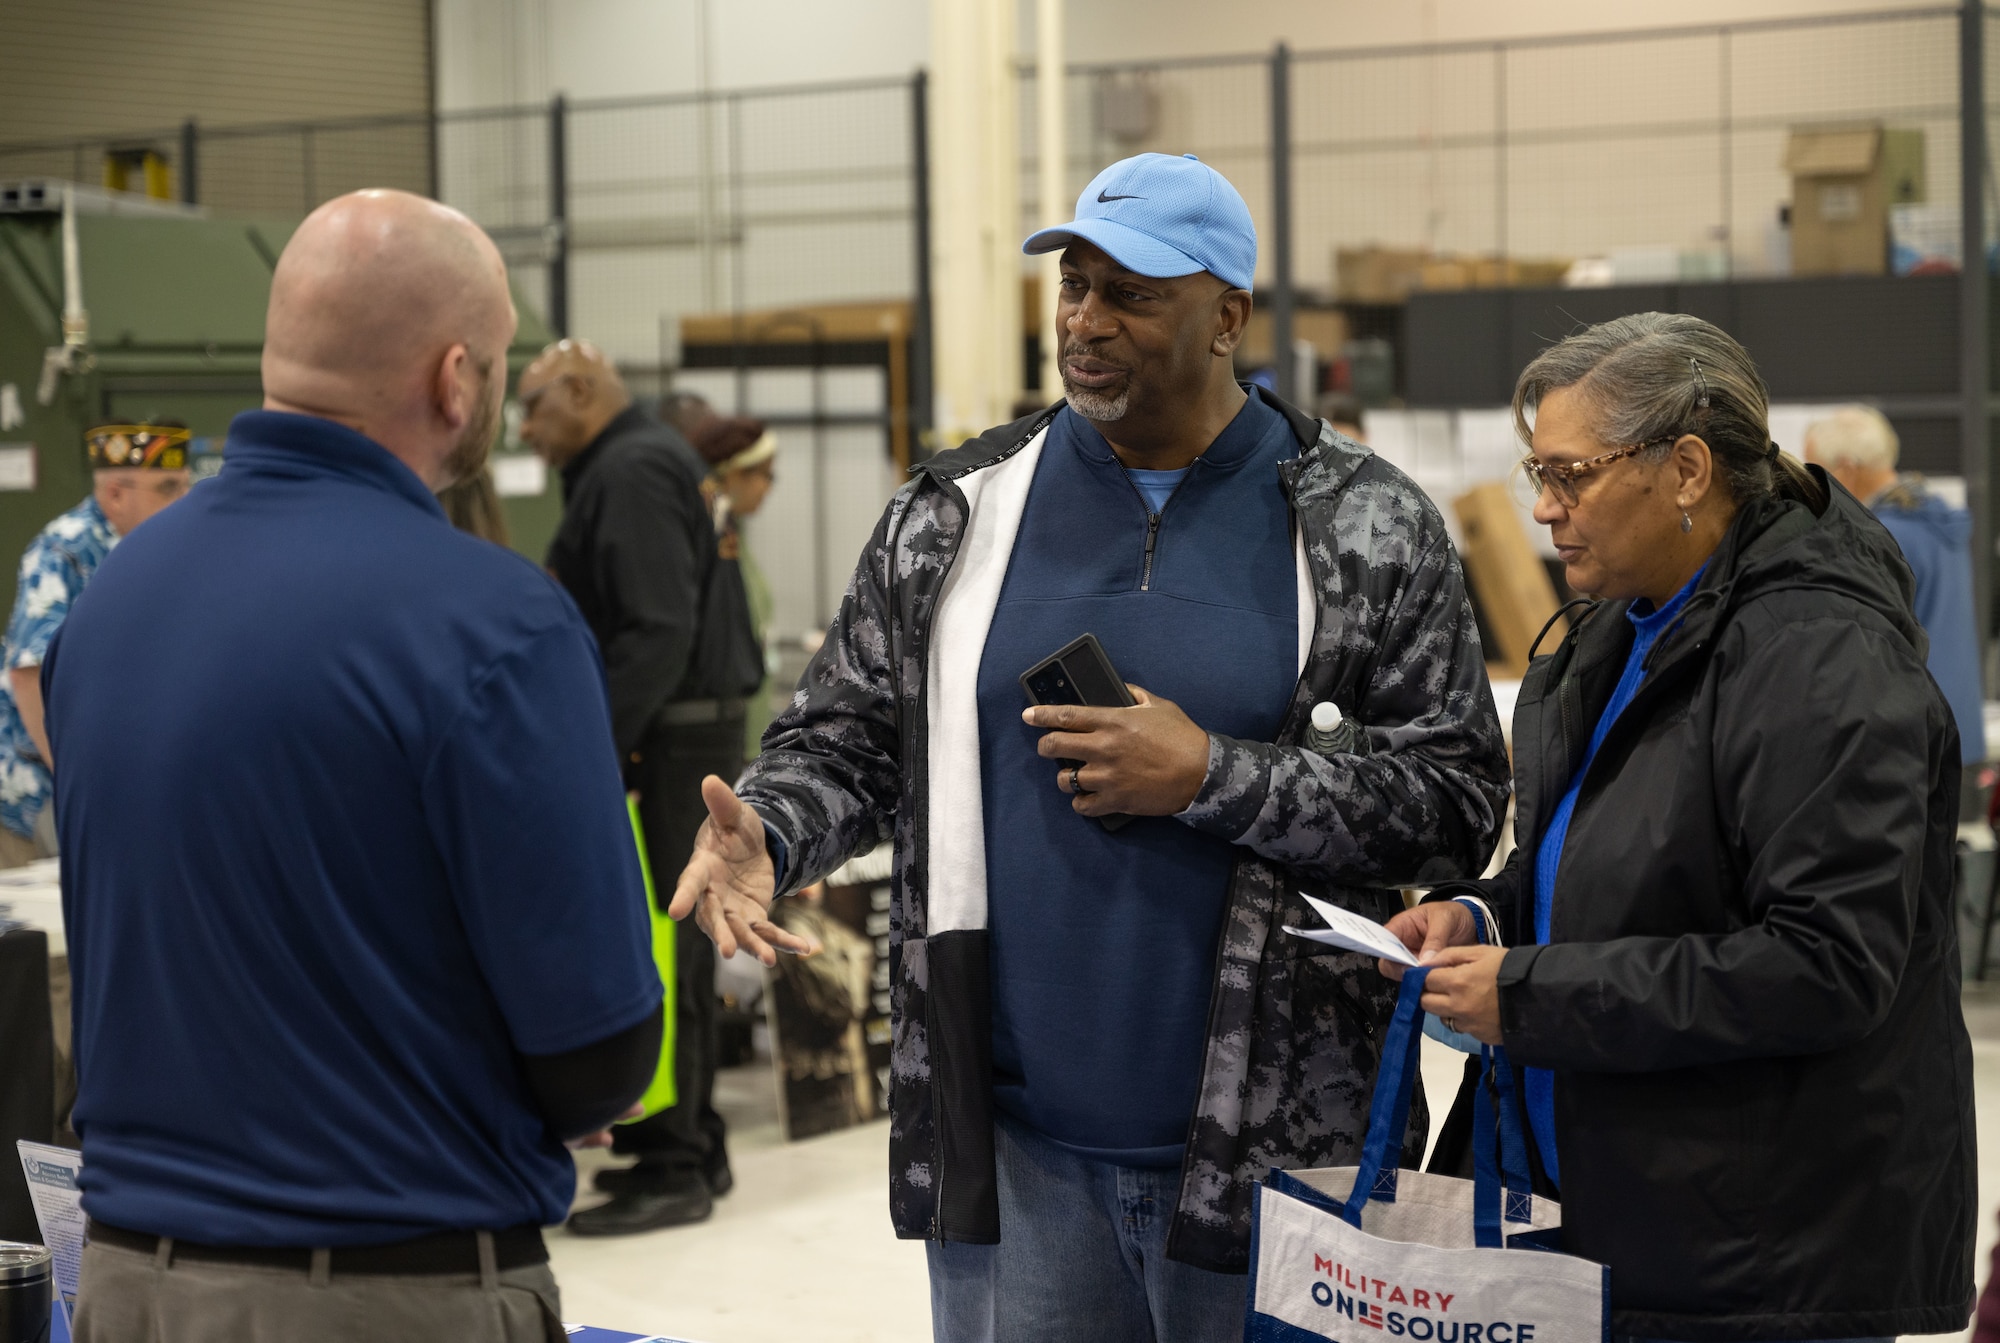 Gerald Spady, middle, retired Air National Guard member, and his wife, Colette, speak with Nicholas Kligmann, left, 436th Force Support Squadron human resources specialist, during the 2023 Retiree Appreciation Day event on Dover Air Force Base, Delaware, April 28, 2023. The event connected military retirees with helpful resources including the 436th Medical Group, Dover AFB Military and Family Readiness Center, 436th Airlift Wing Legal Office and Air Force Sergeants Association. (U.S. Air Force photo by Senior Airman Cydney Lee)